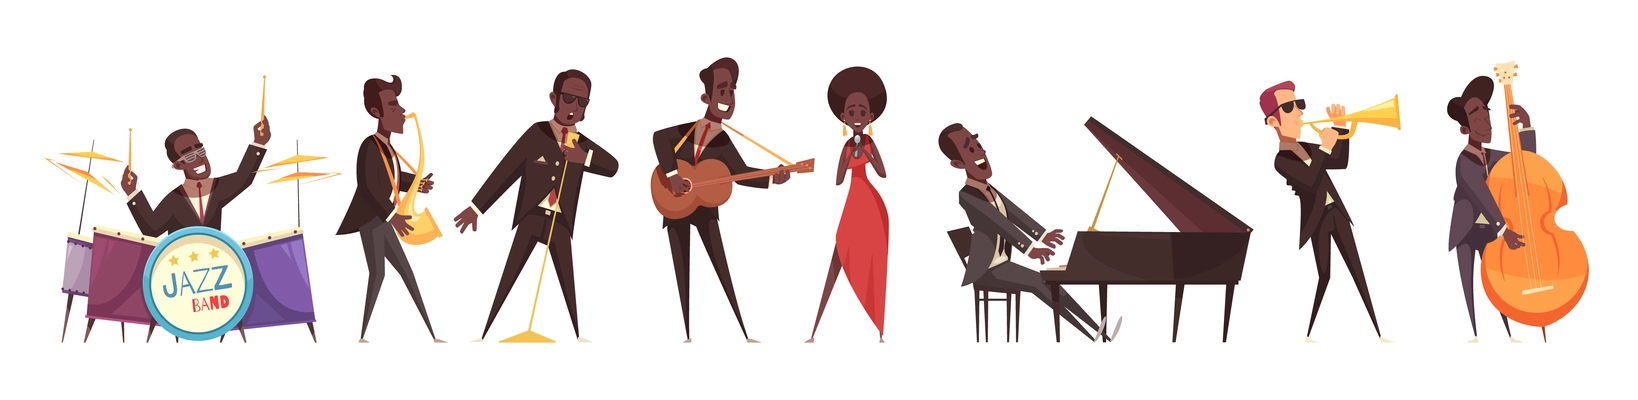 Jazz musicians set of isolated cartoon style human characters of people playing various musical instruments vector illustration